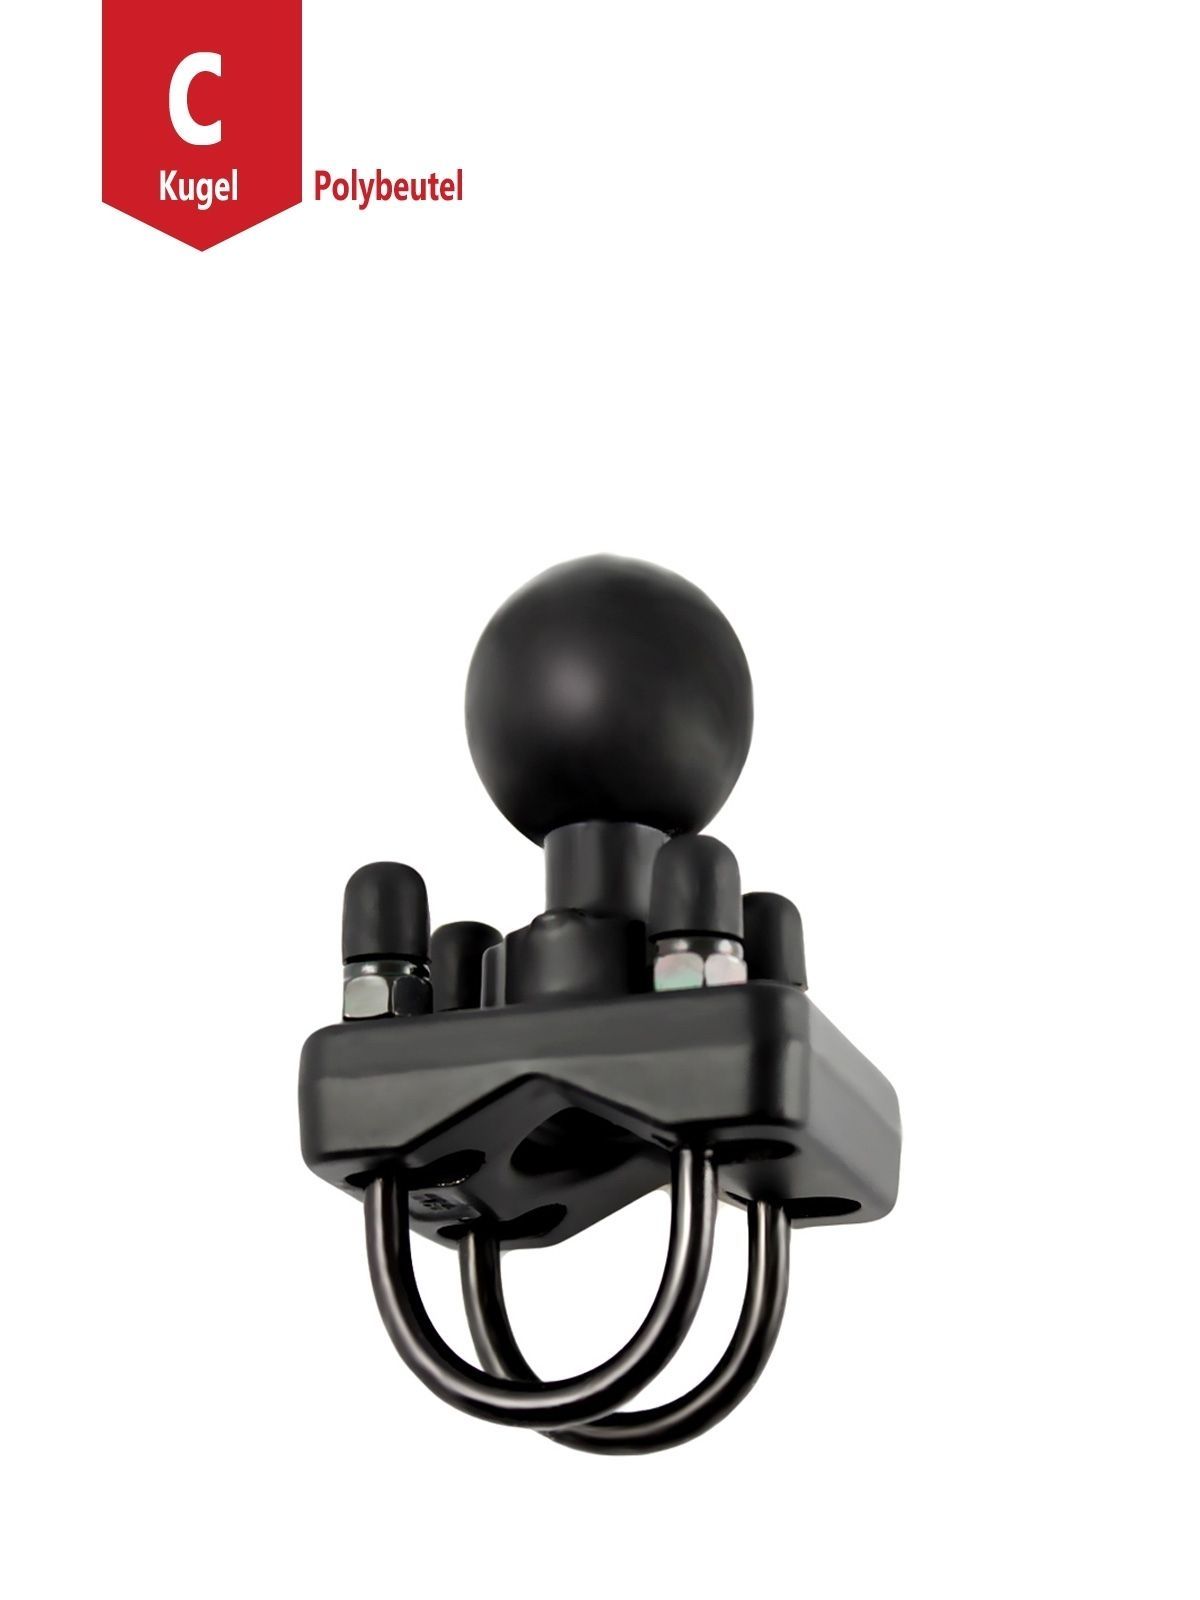 RAM MOUNTS Double U-Bolt Base with 1.5" C-Ball - for diameters up to 1.25"